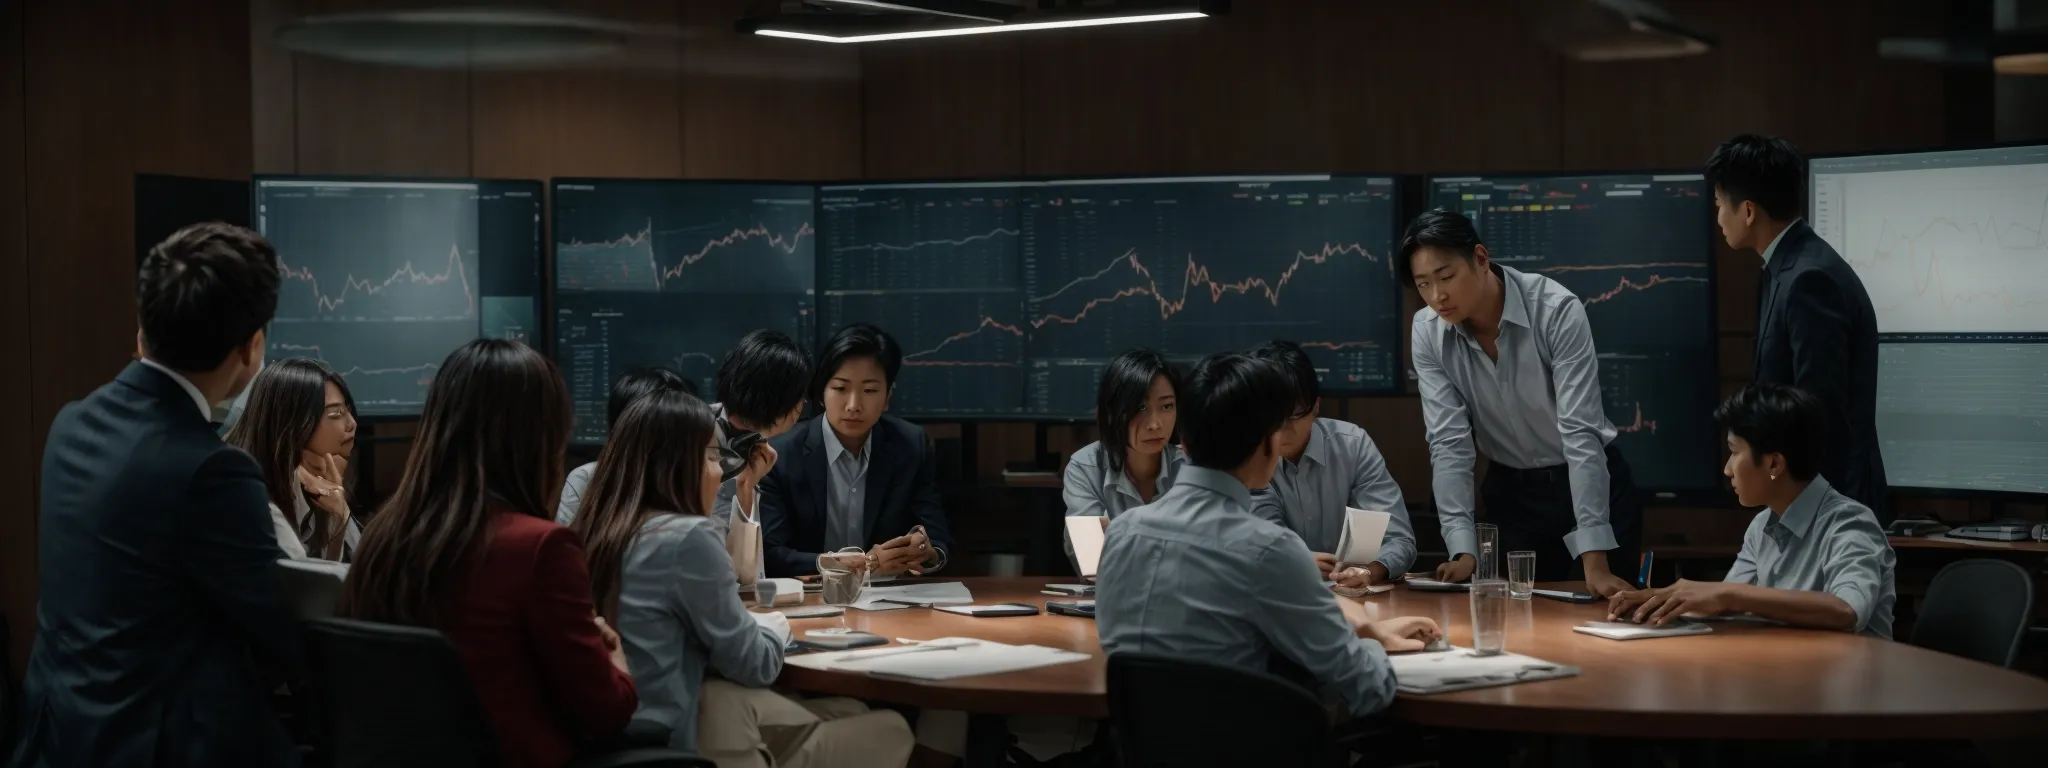 a team of professionals gathered around a conference table, intently analyzing graphs and charts displayed on a large monitor.